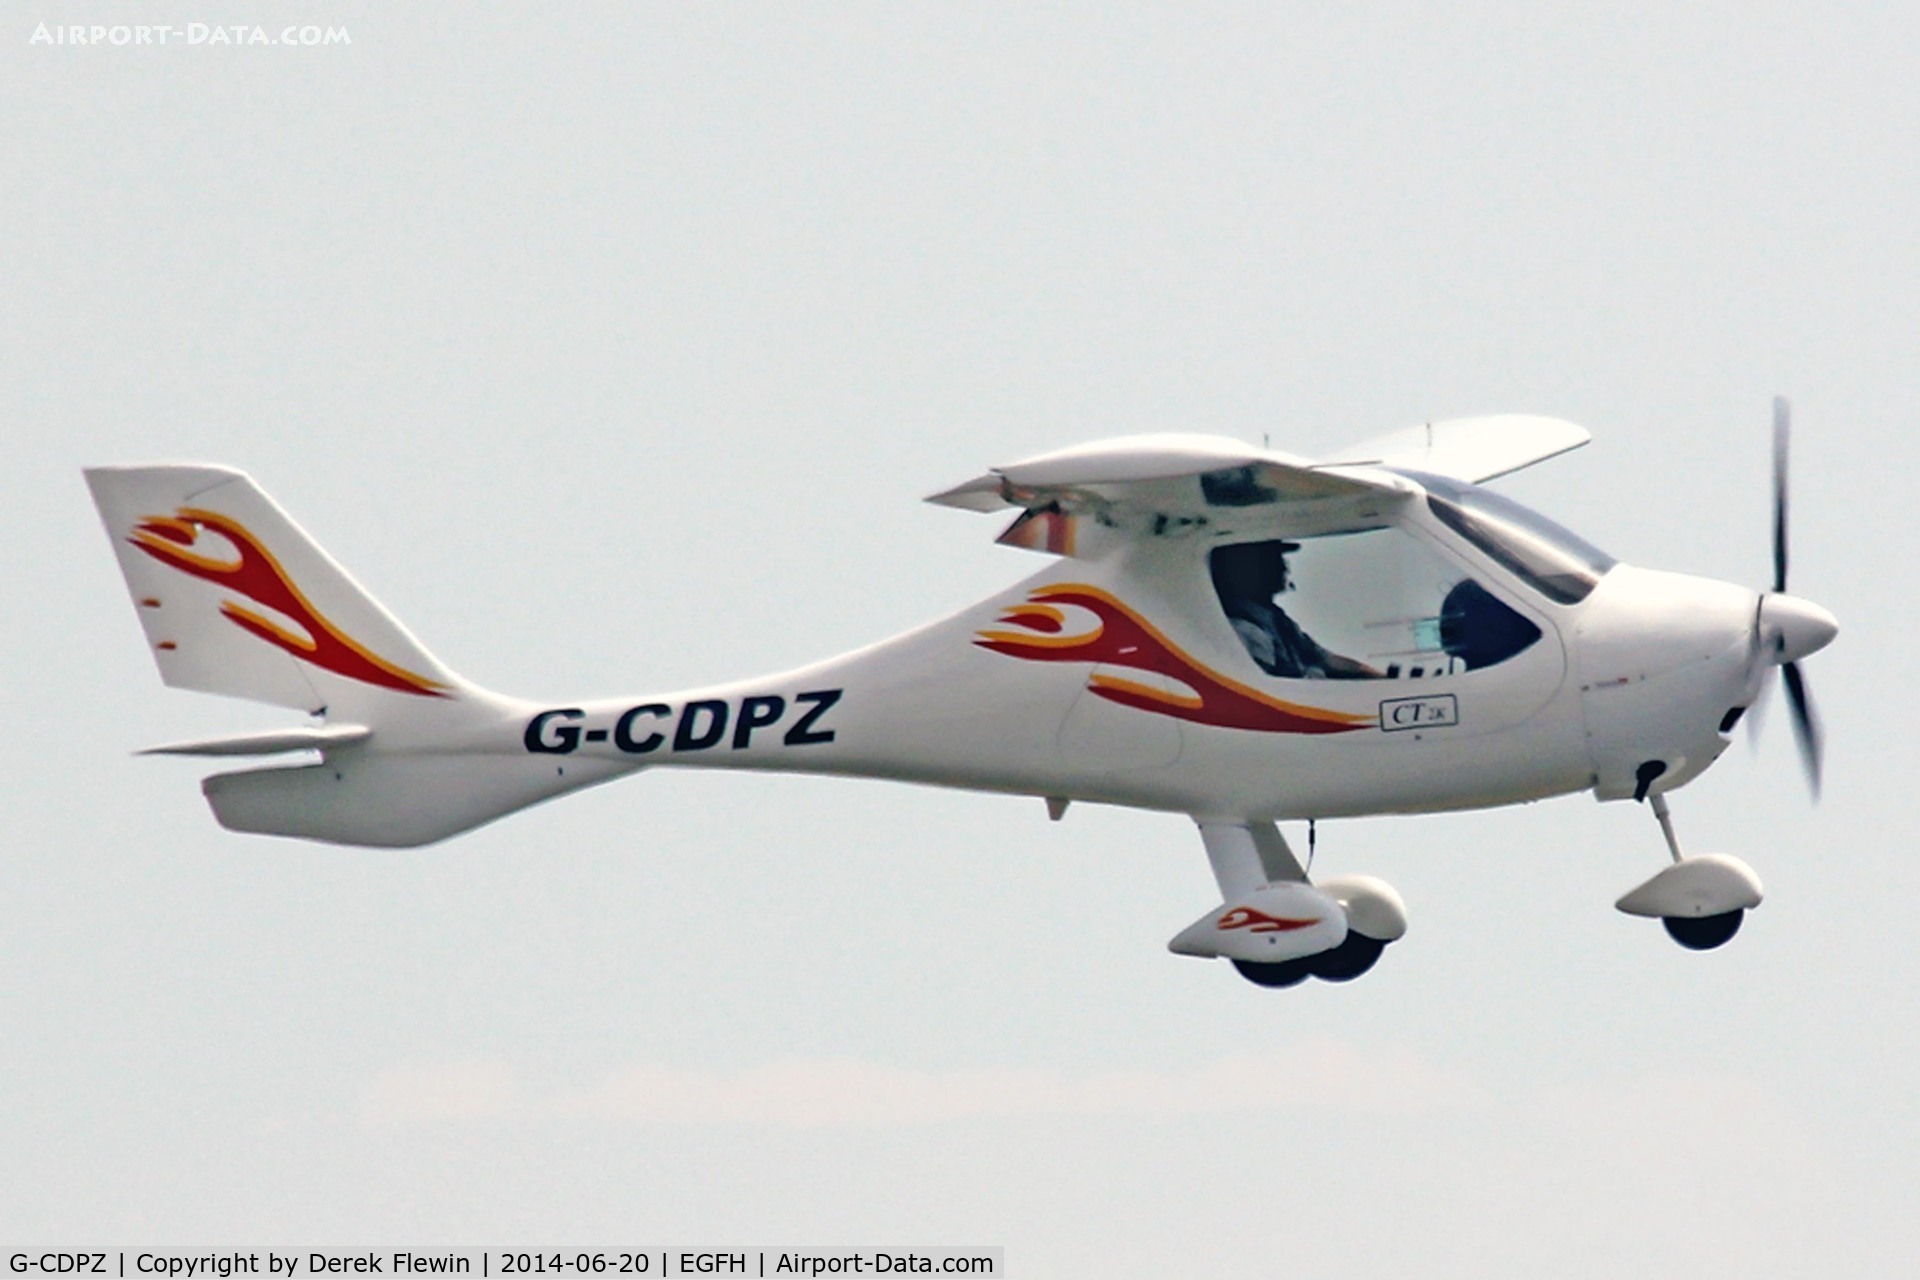 G-CDPZ, 2005 Flight Design CT2K C/N 8124, Visiting CT-2K, seen pulling out from runway 28 at EGFH.